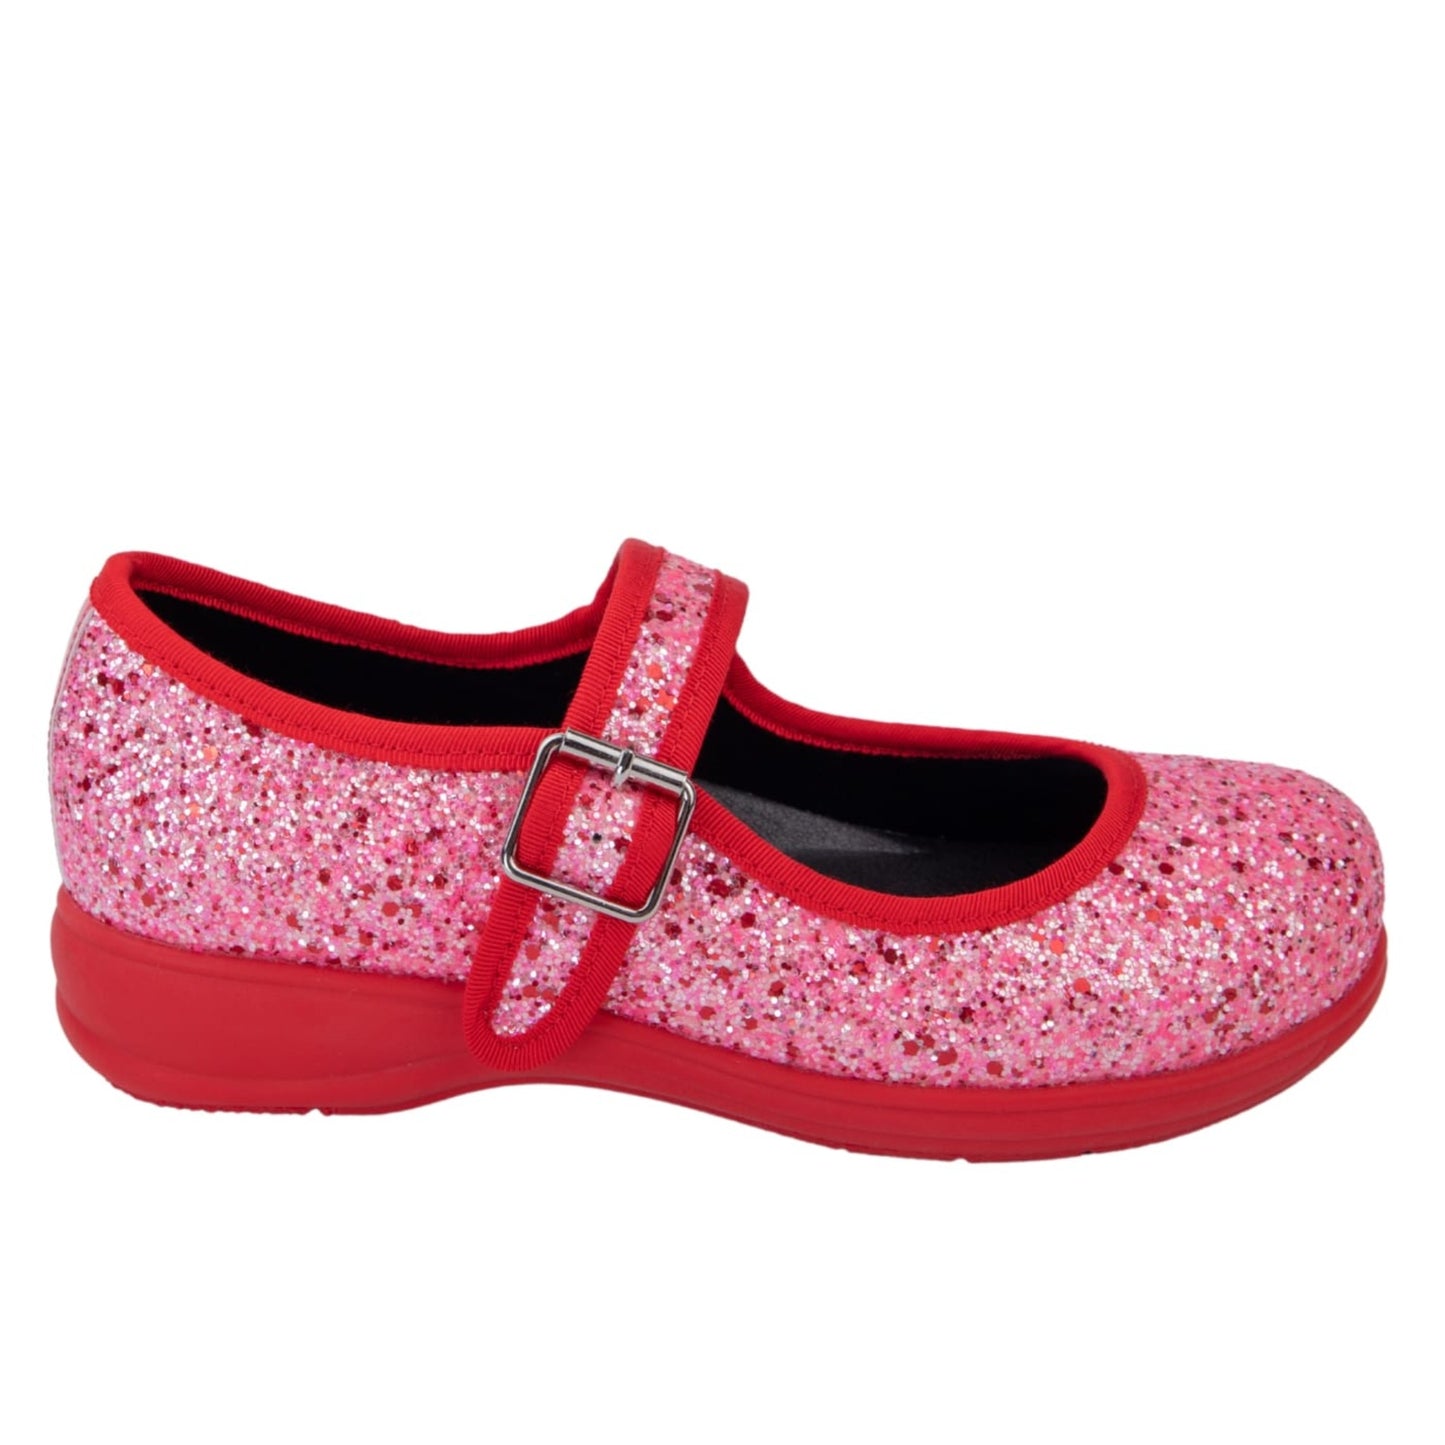 Sherbet Mary Janes by RainbowsAndFairies.com.au (Pink Glitter - Red Glitter - Mismatched Shoes - Glitter Shoes - Sparkle) - SKU: FW_MARYJ_GLITR_SHE - Pic-03